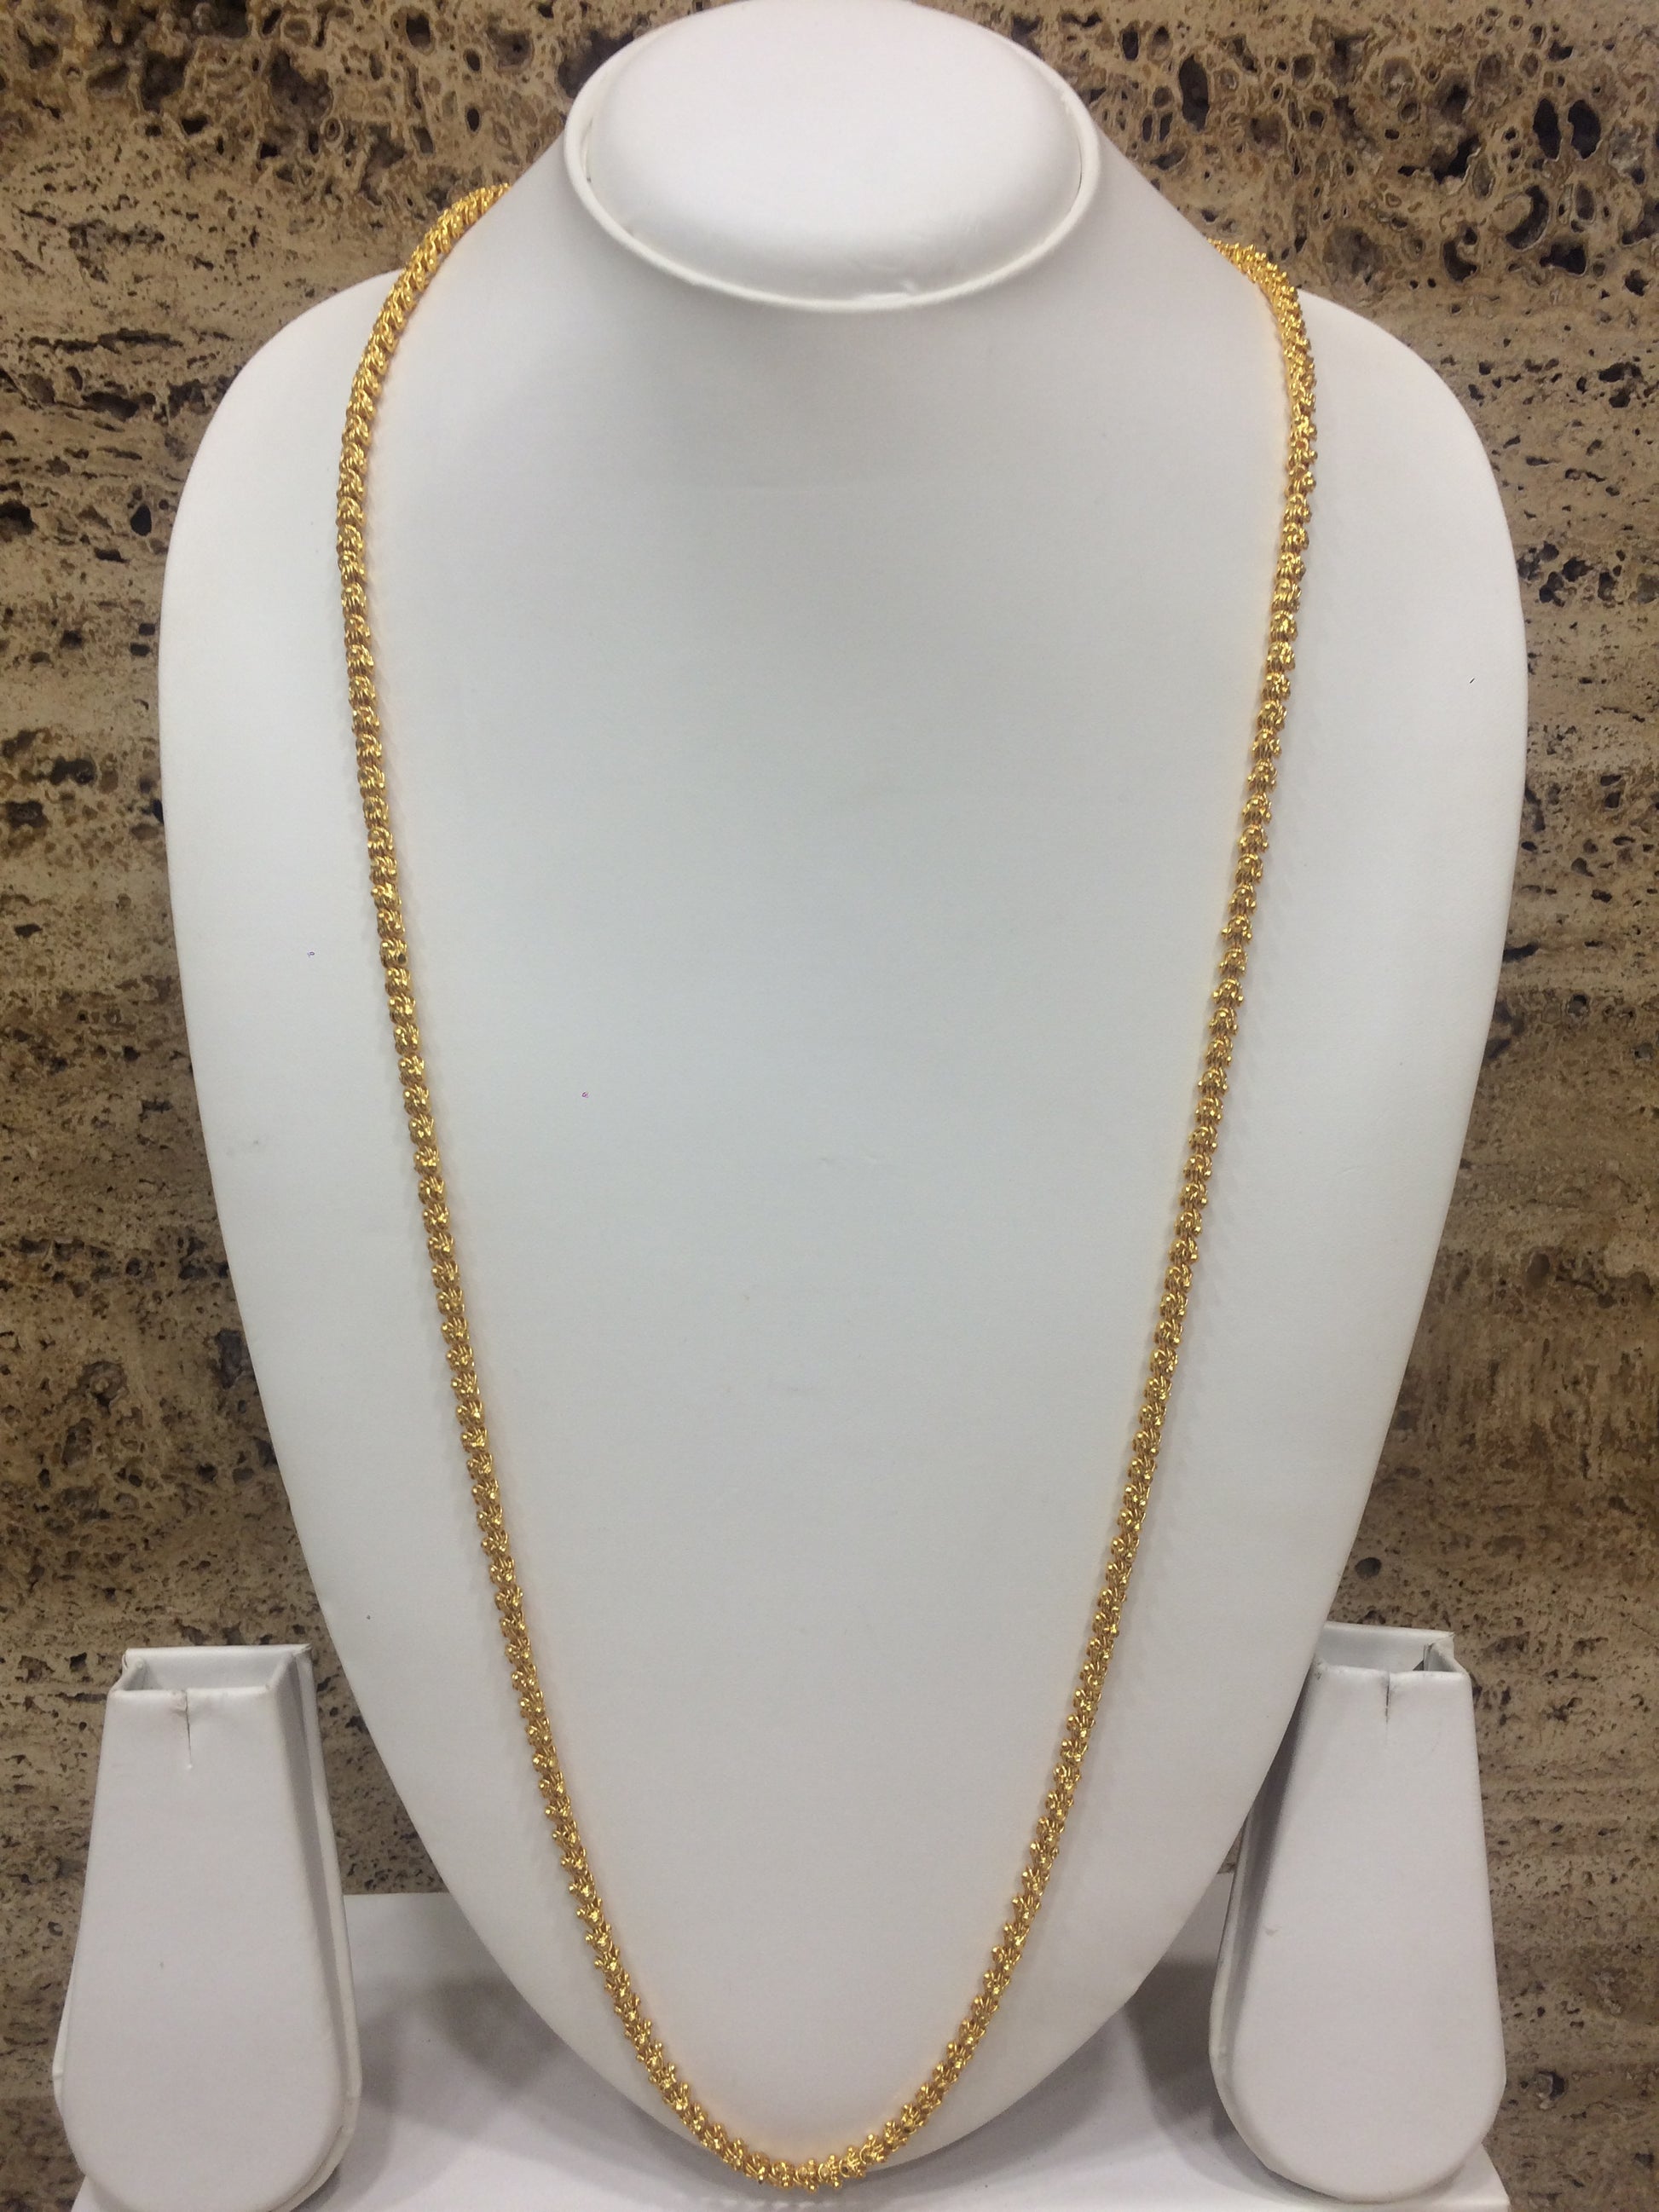 Digital Dress Room Traditional Single Line Layer Golden Necklace for Women